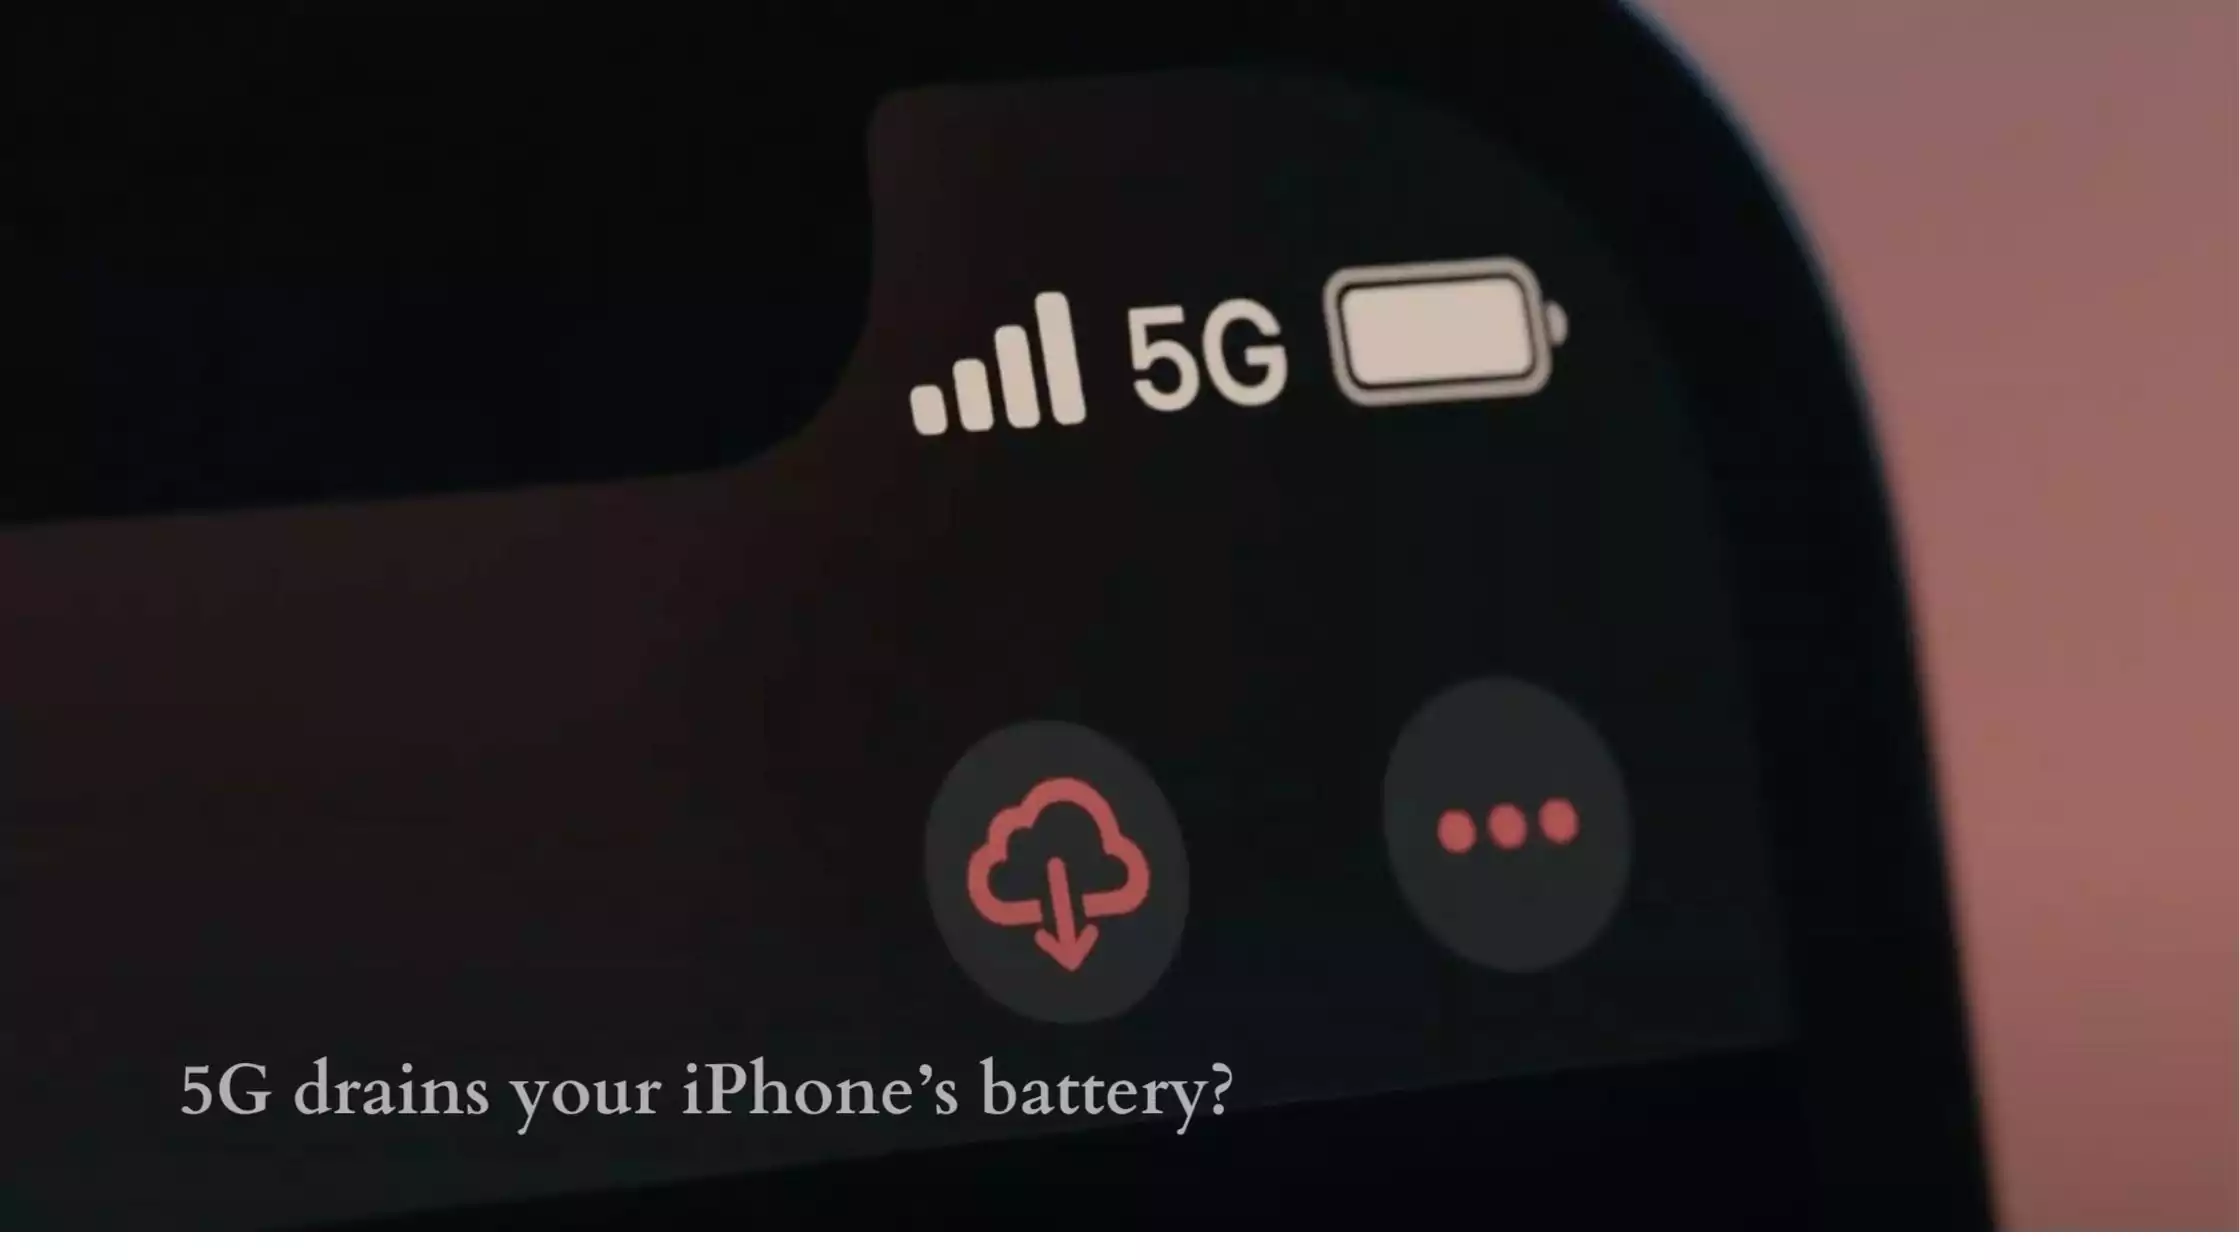 5G drains your iPhone’s battery